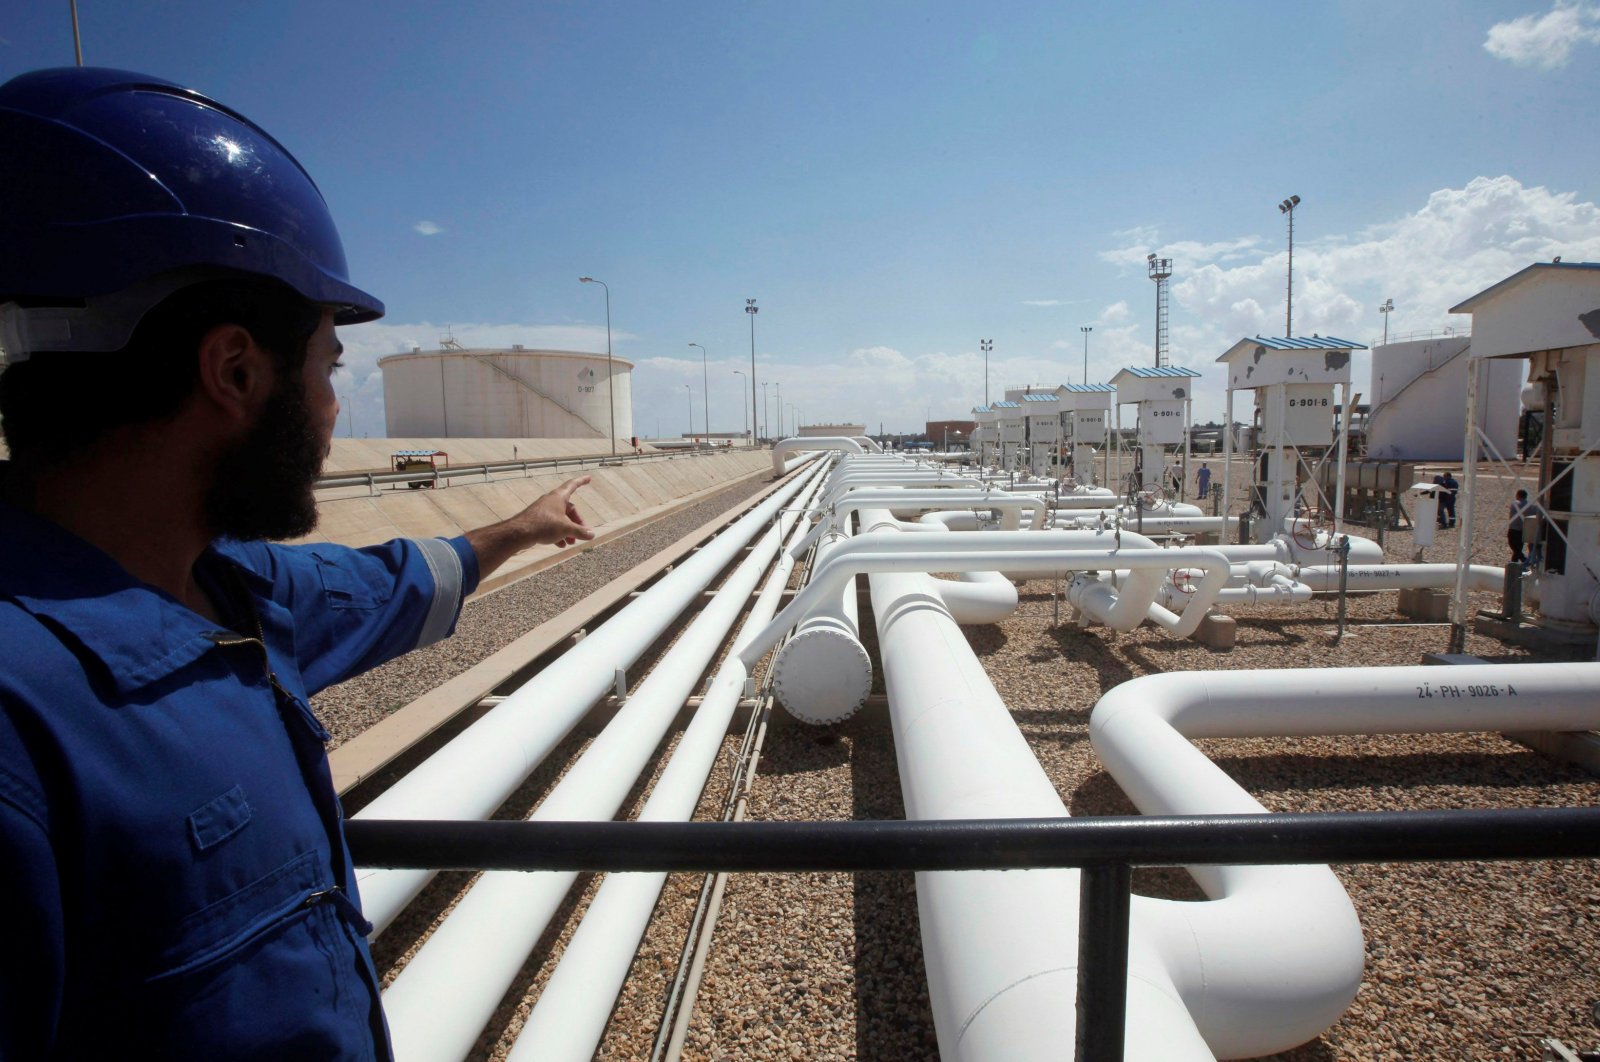 A worker gestures towards pipelines at the port and Zawiya Oil Refinery, Aug. 22, 2013. (Reuters Photo)